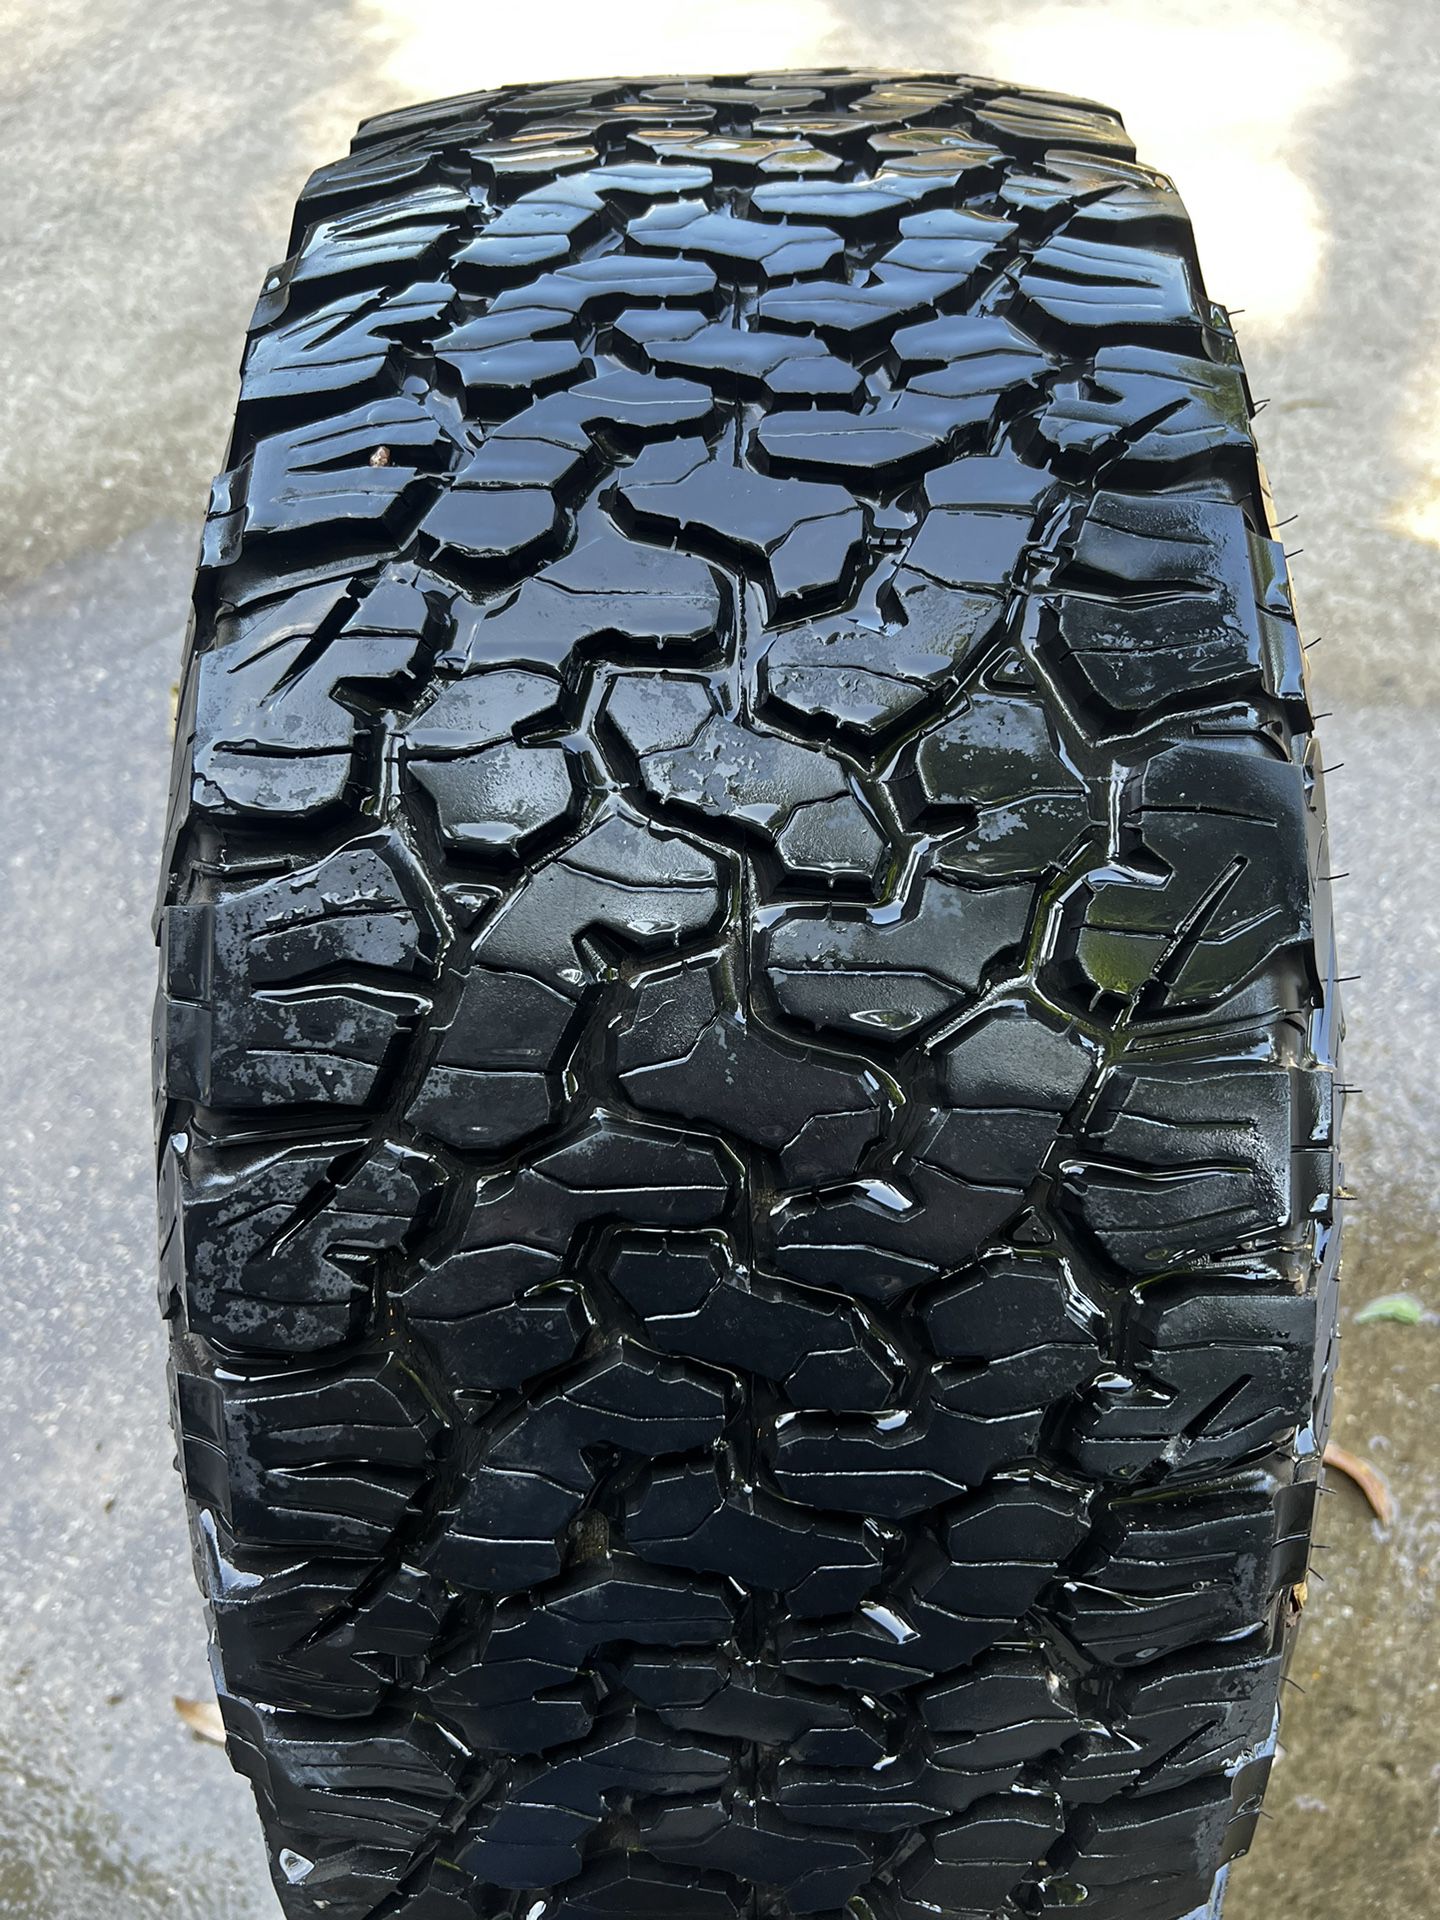 Truck Tires For Sale